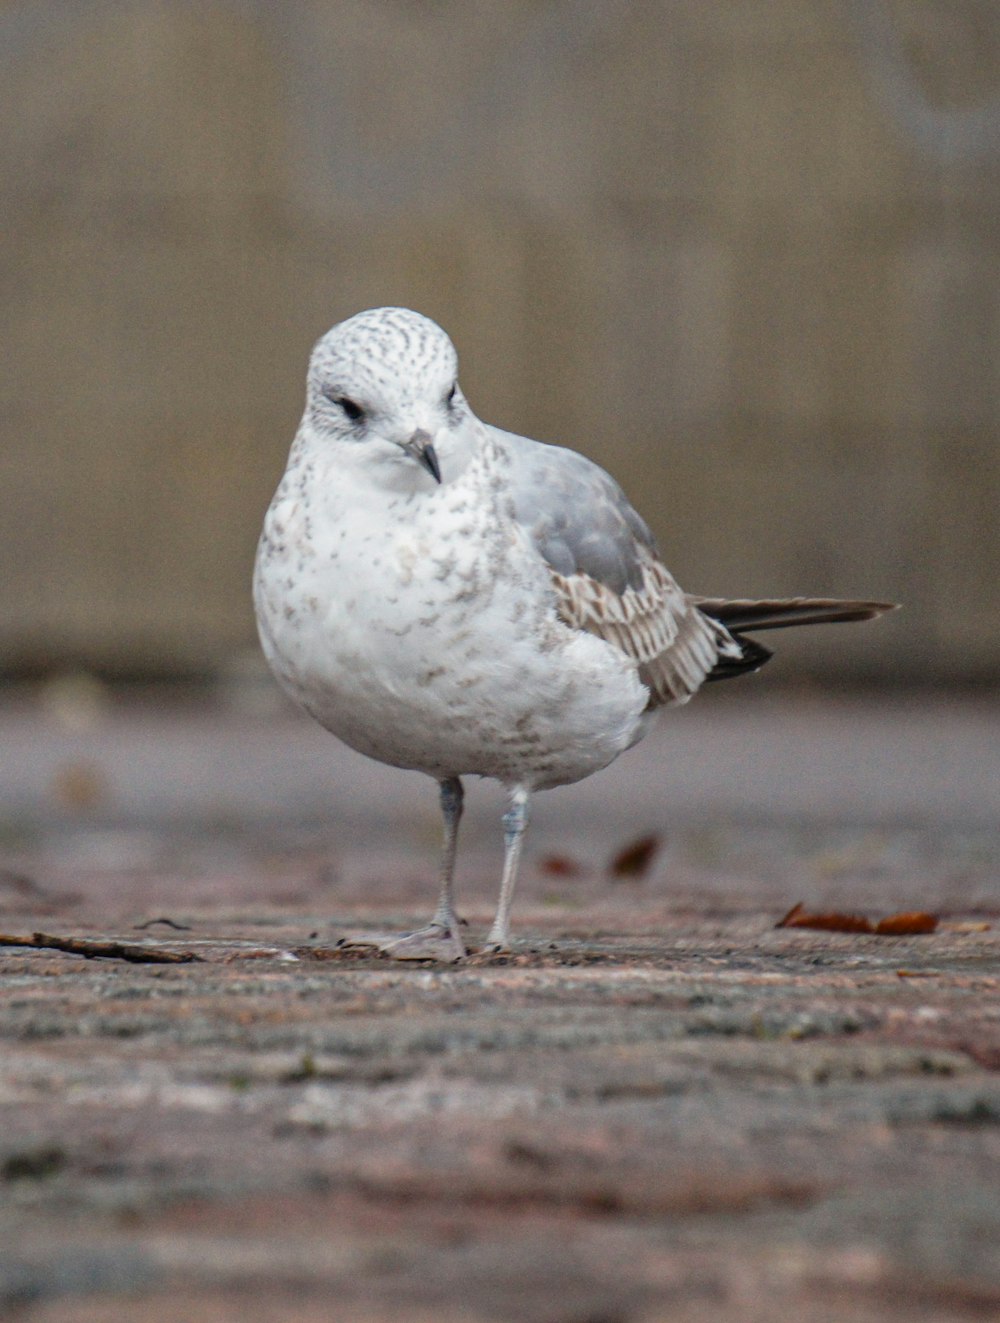 a white and gray bird standing on the ground